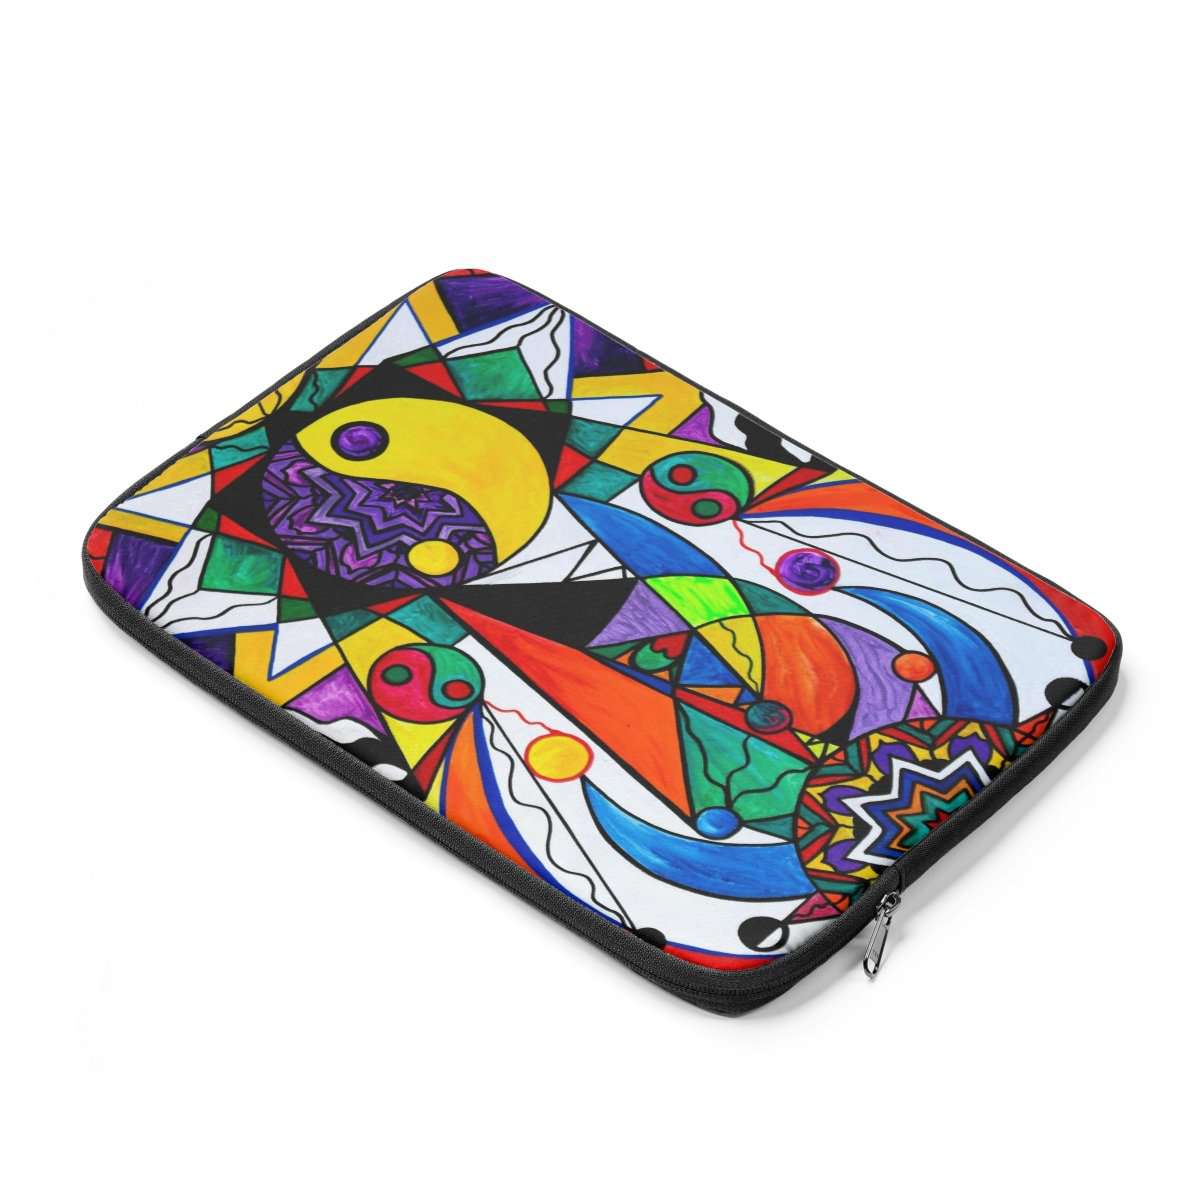 where-can-i-buy-compatibility-laptop-sleeve-online-now_1.jpg